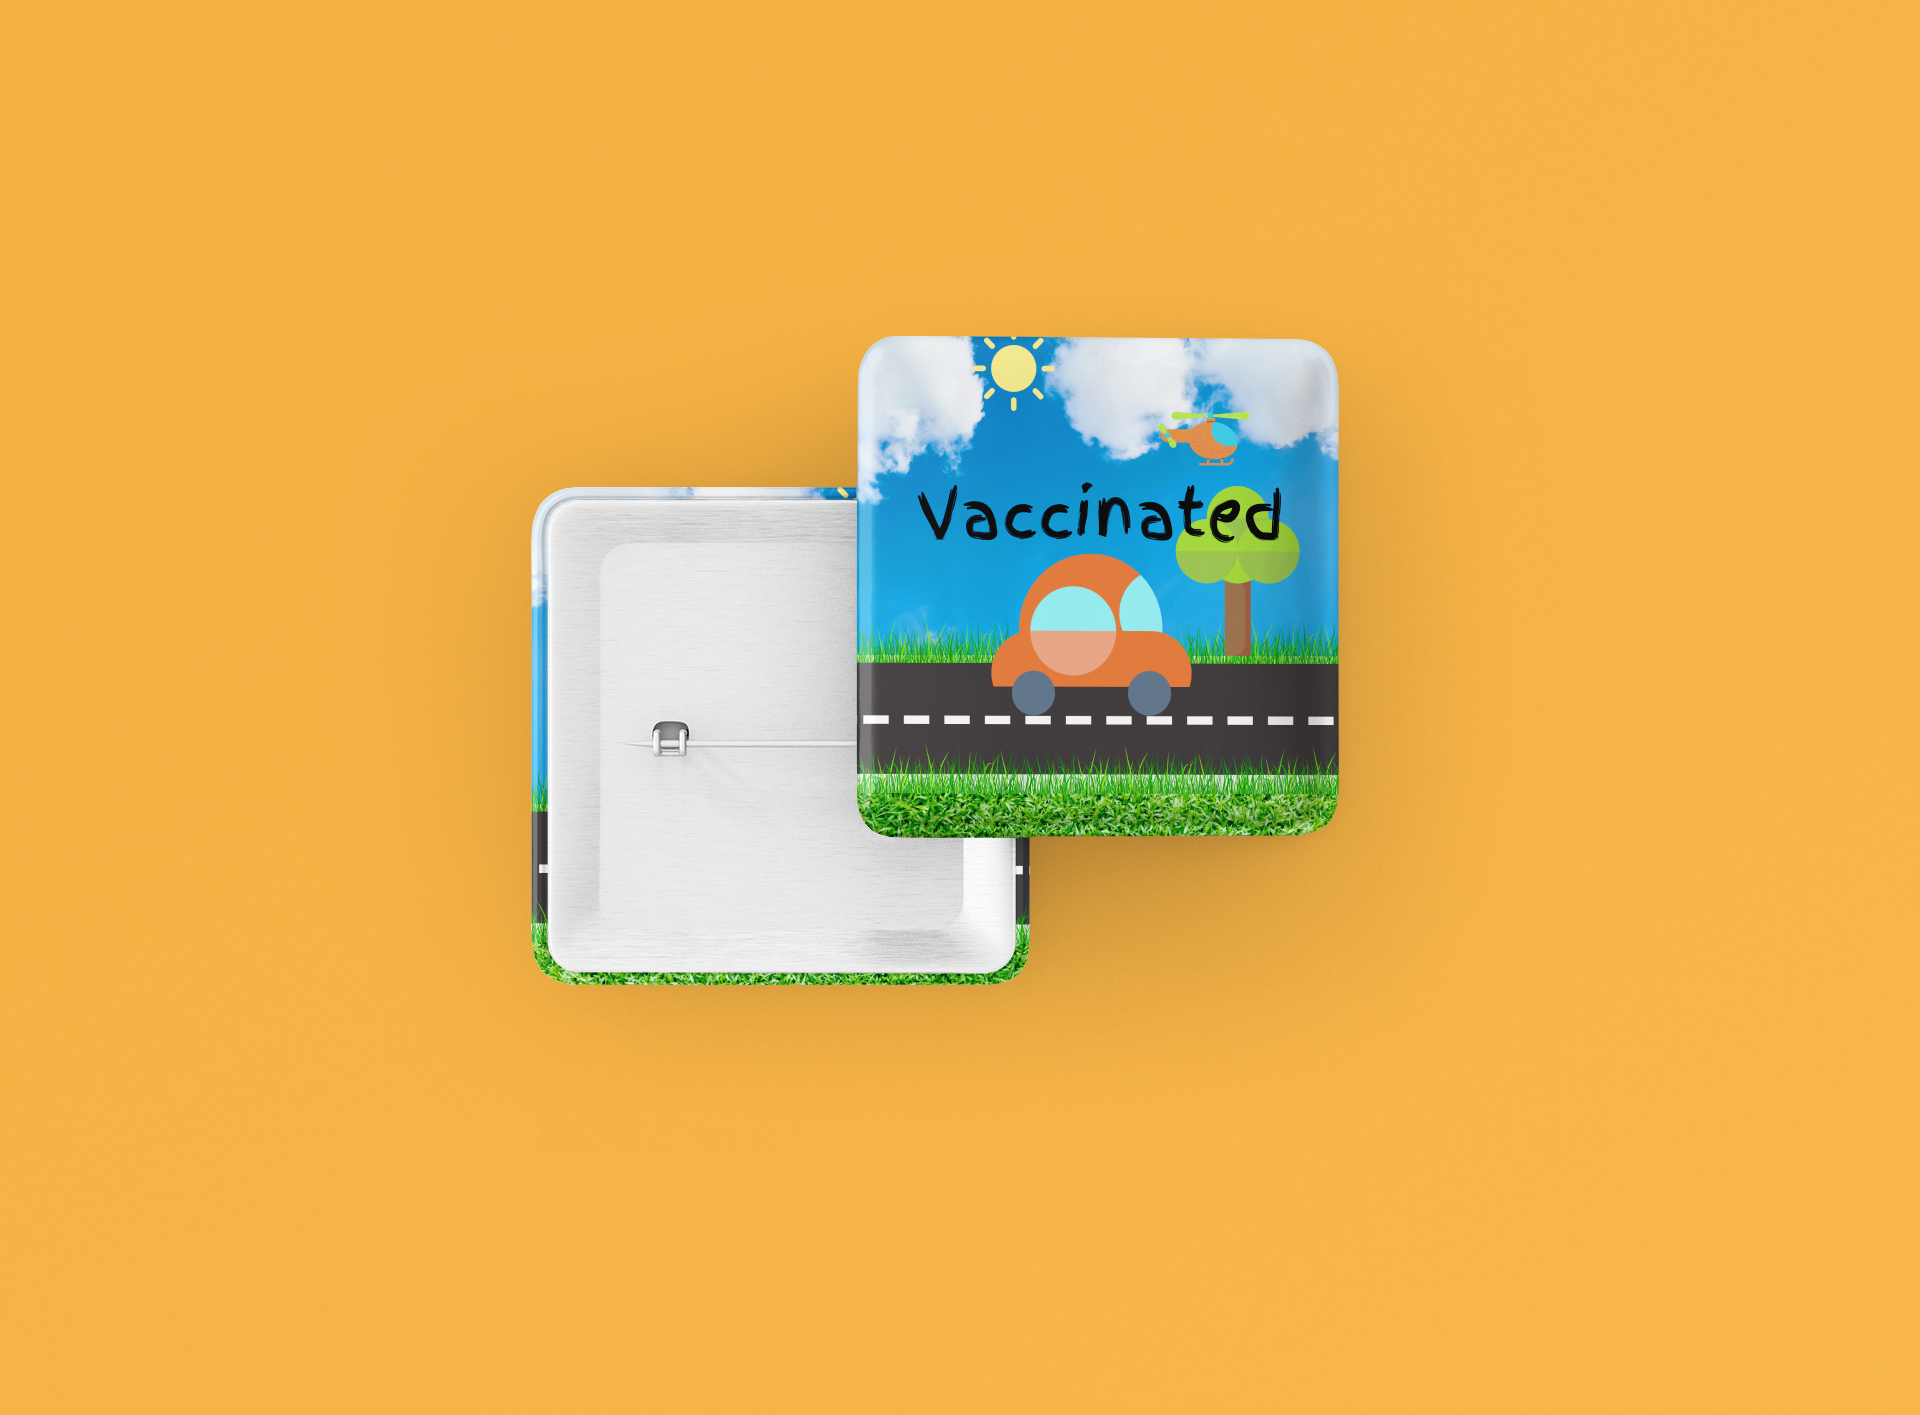 Vaccinated Car on Road Square Button/Pin